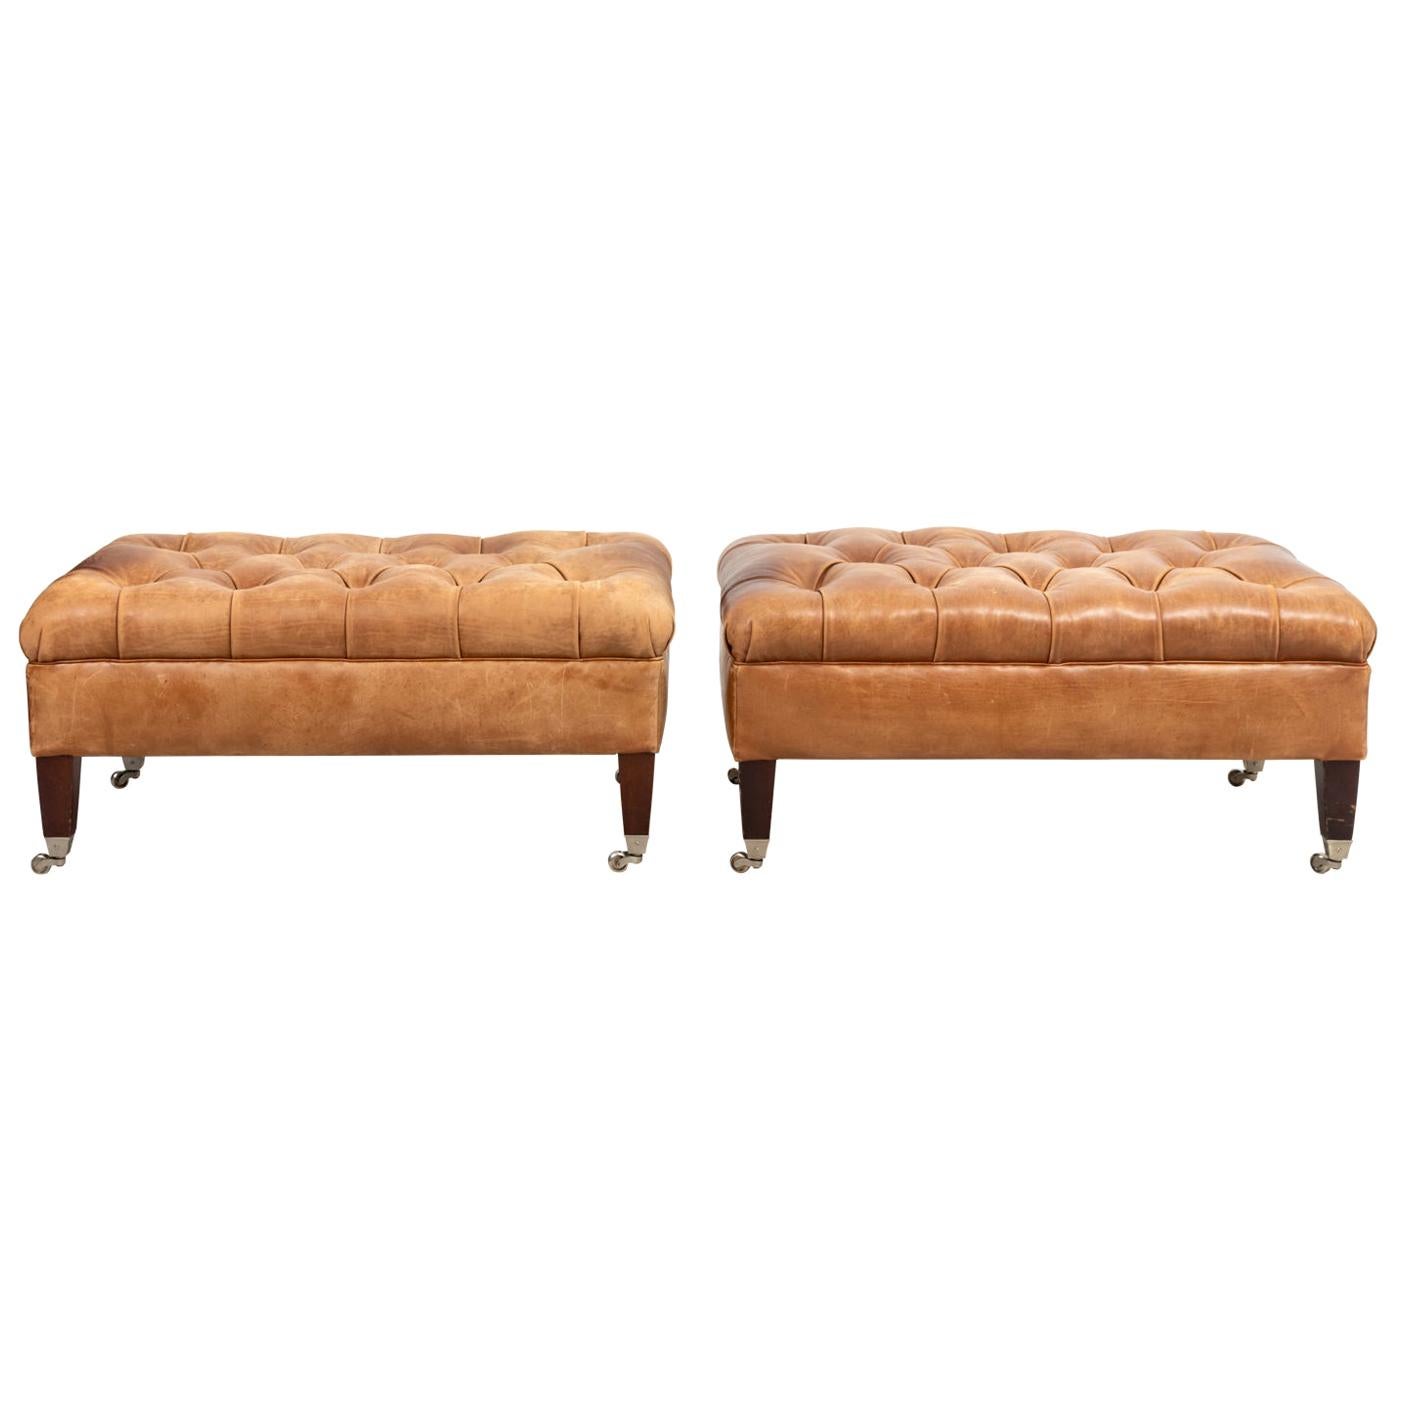 Pair of English Style Leather Tufted Benches